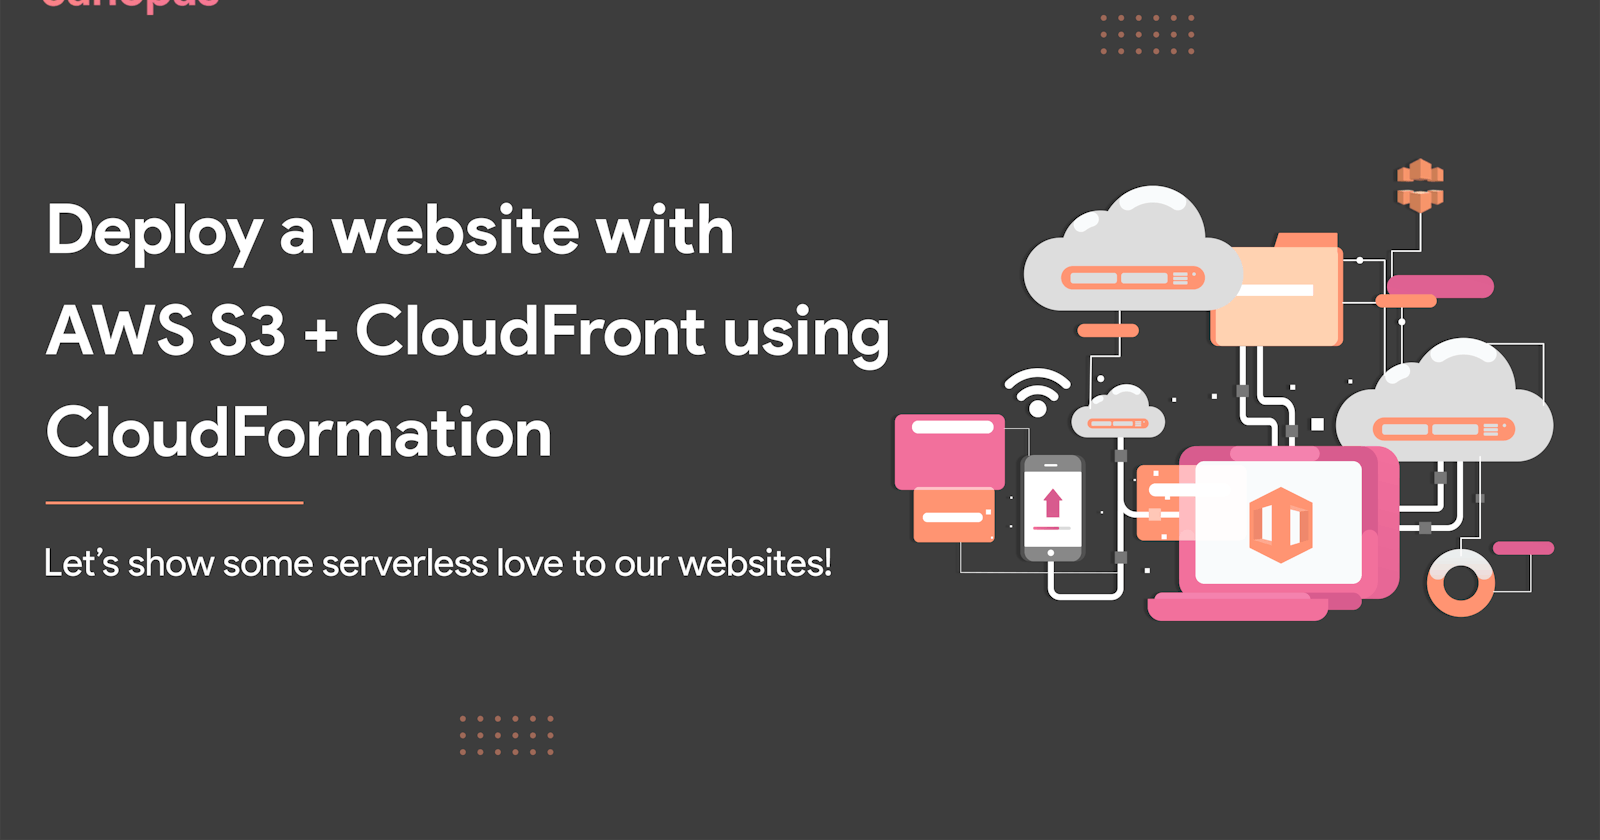 How to deploy a website using AWS S3, CloudFront, and CloudFormation?